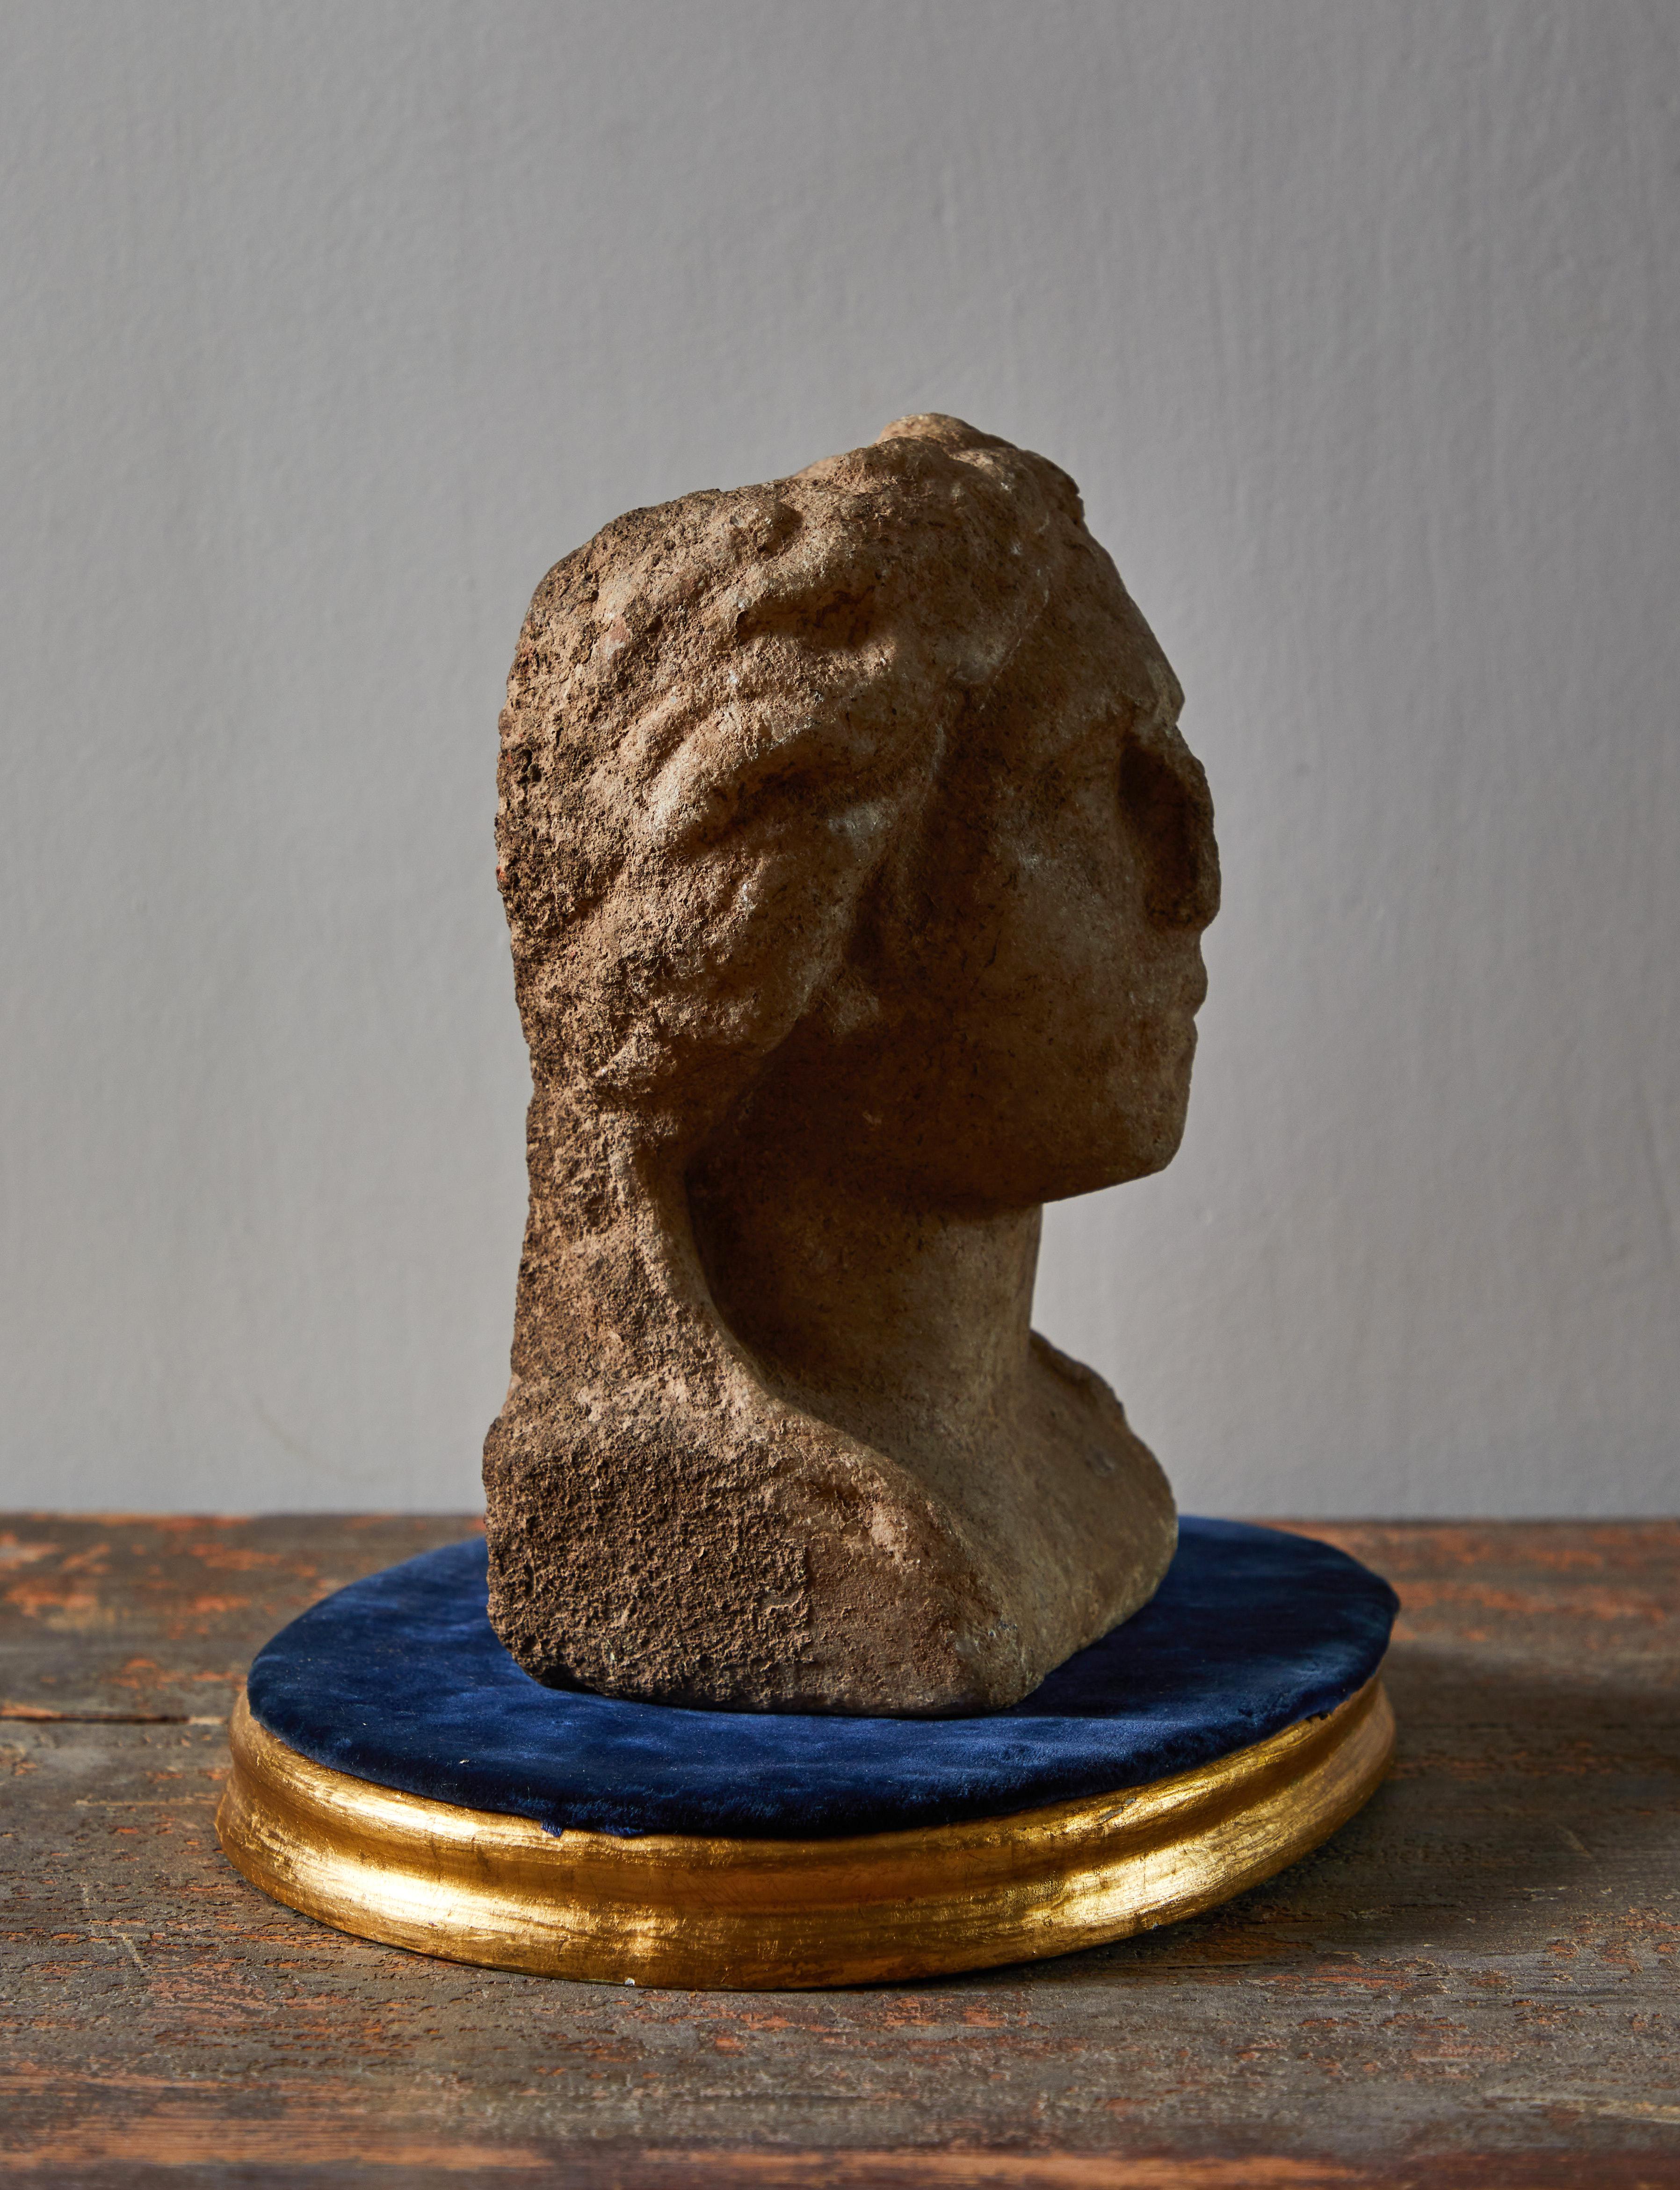 Limestone female bust with stand. Made in Greece circa 5th century AD.

Provenance: Owned by Sagroniz family, the ambassador to Spain in Italy.